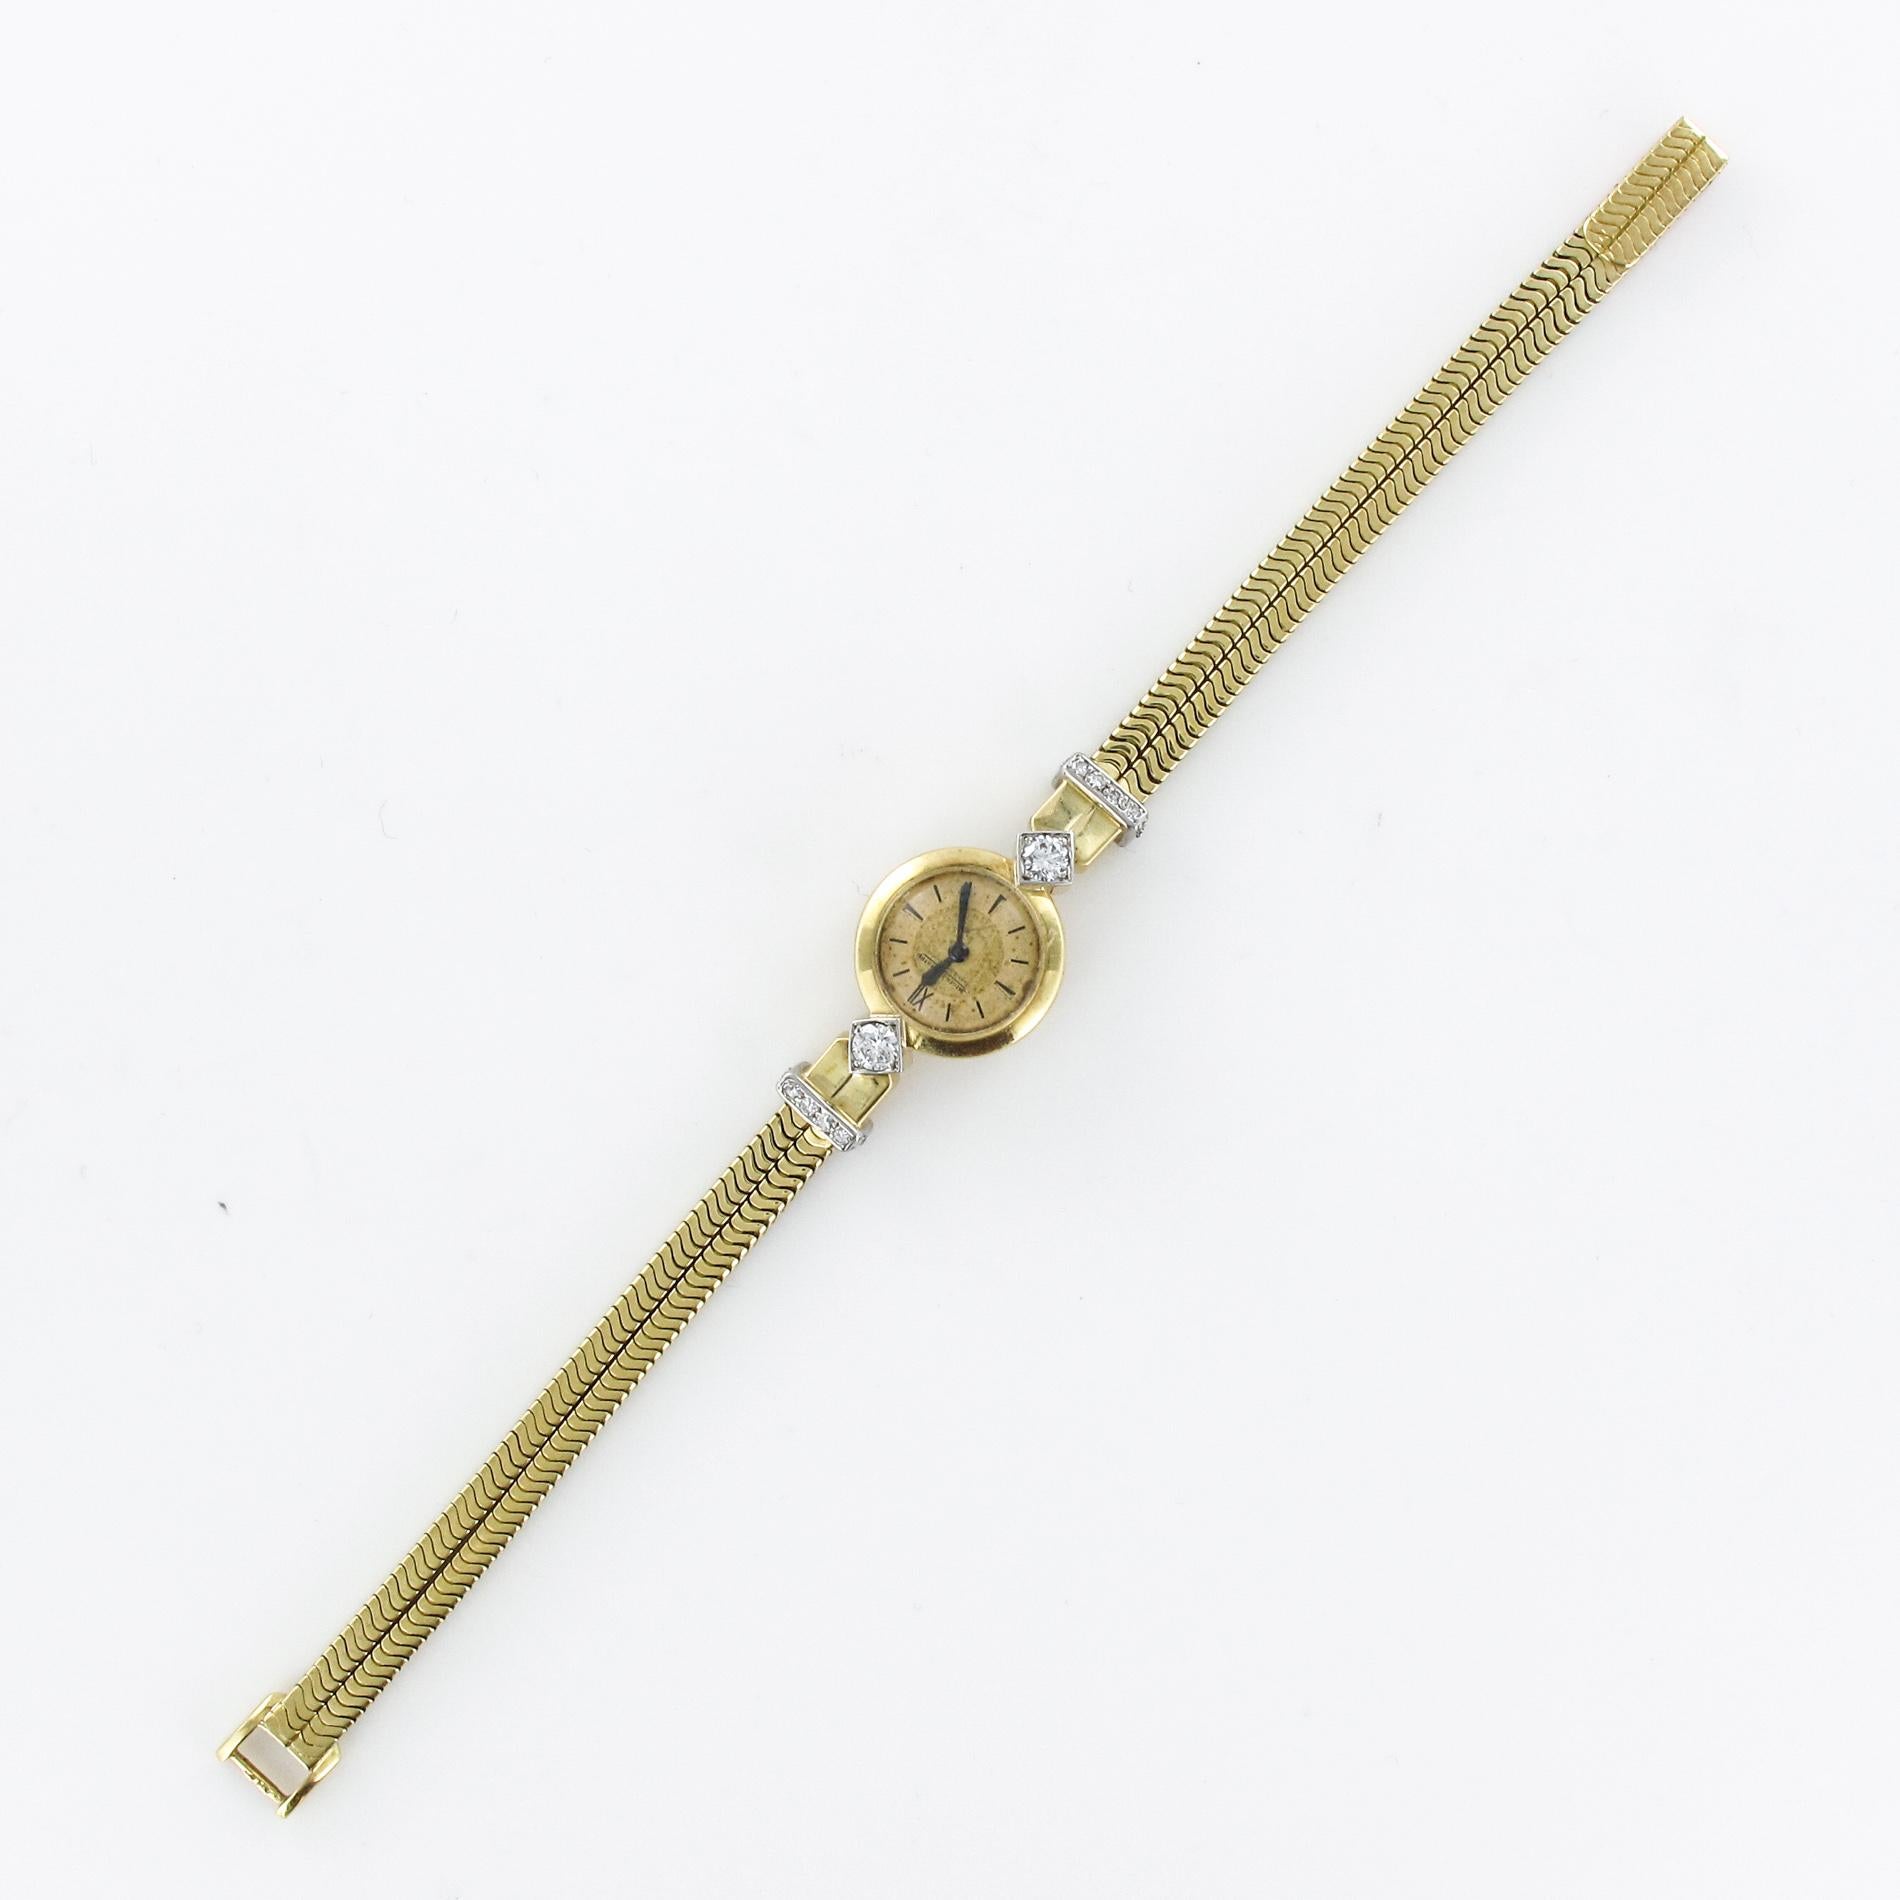 French 1950s Jaeger Le Coultre Diamonds 18 Karat Yellow Gold Women Watch 6